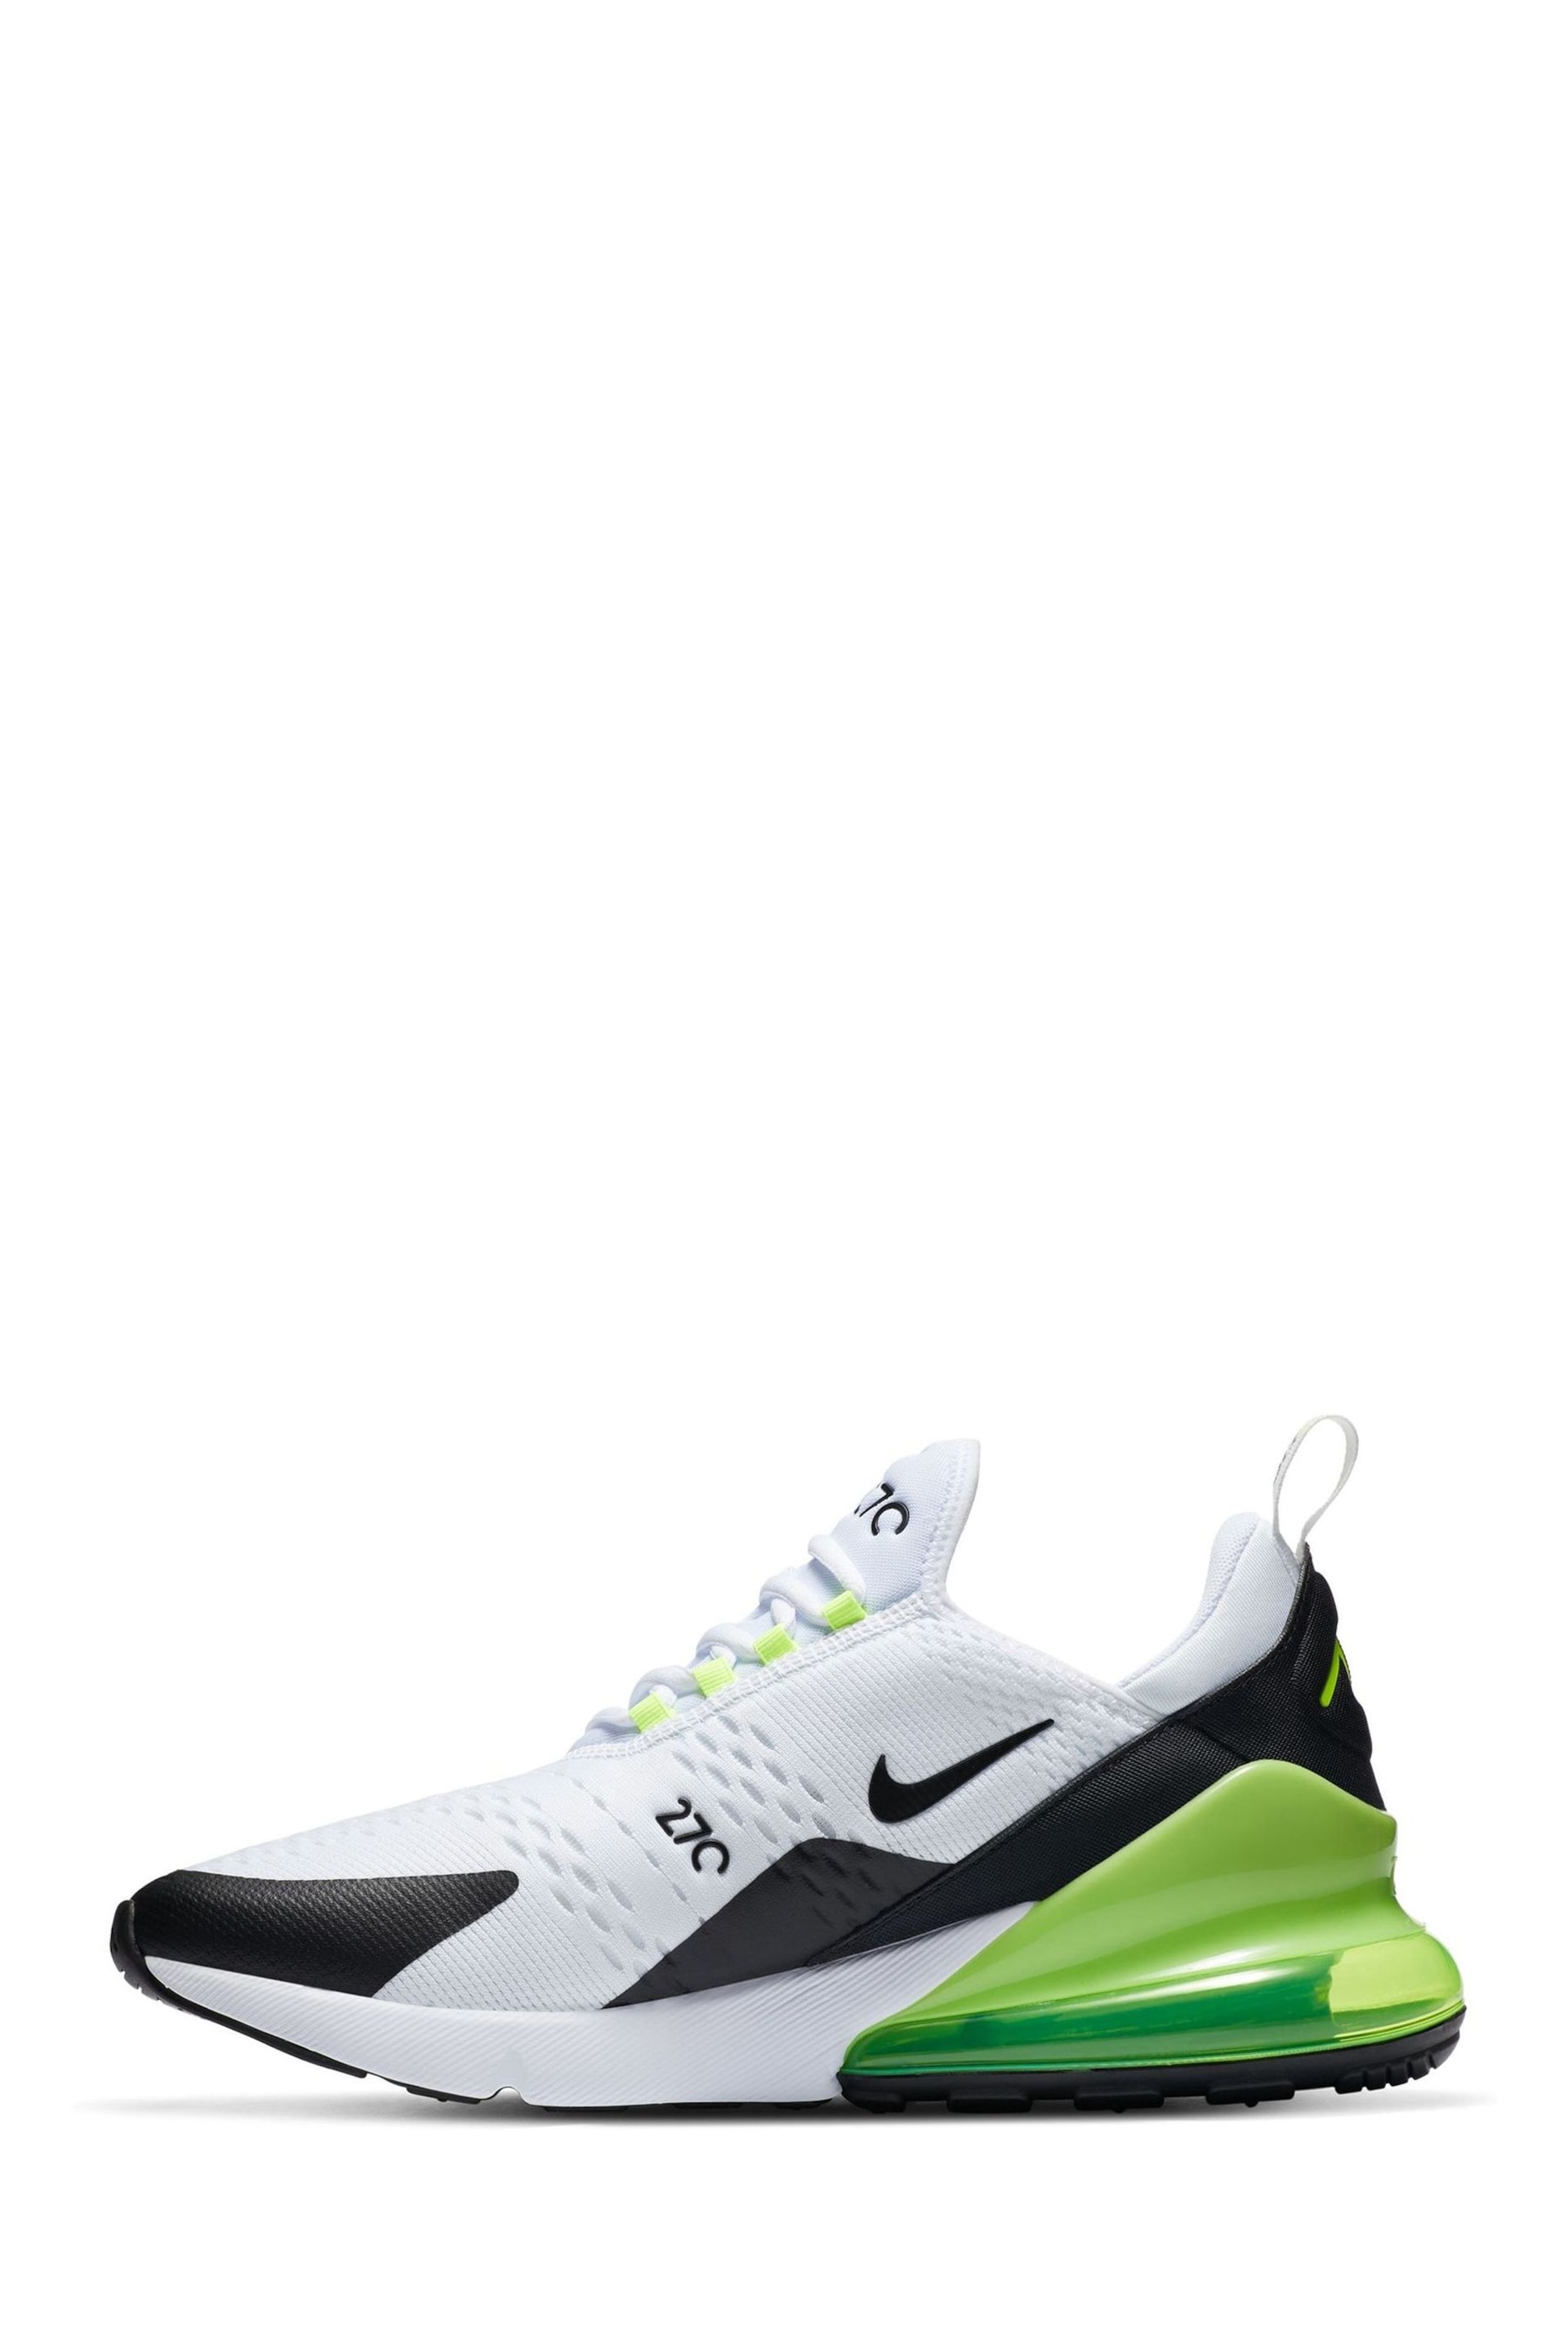 Nike Green/White Air Max 270 Trainers - Image 4 of 10